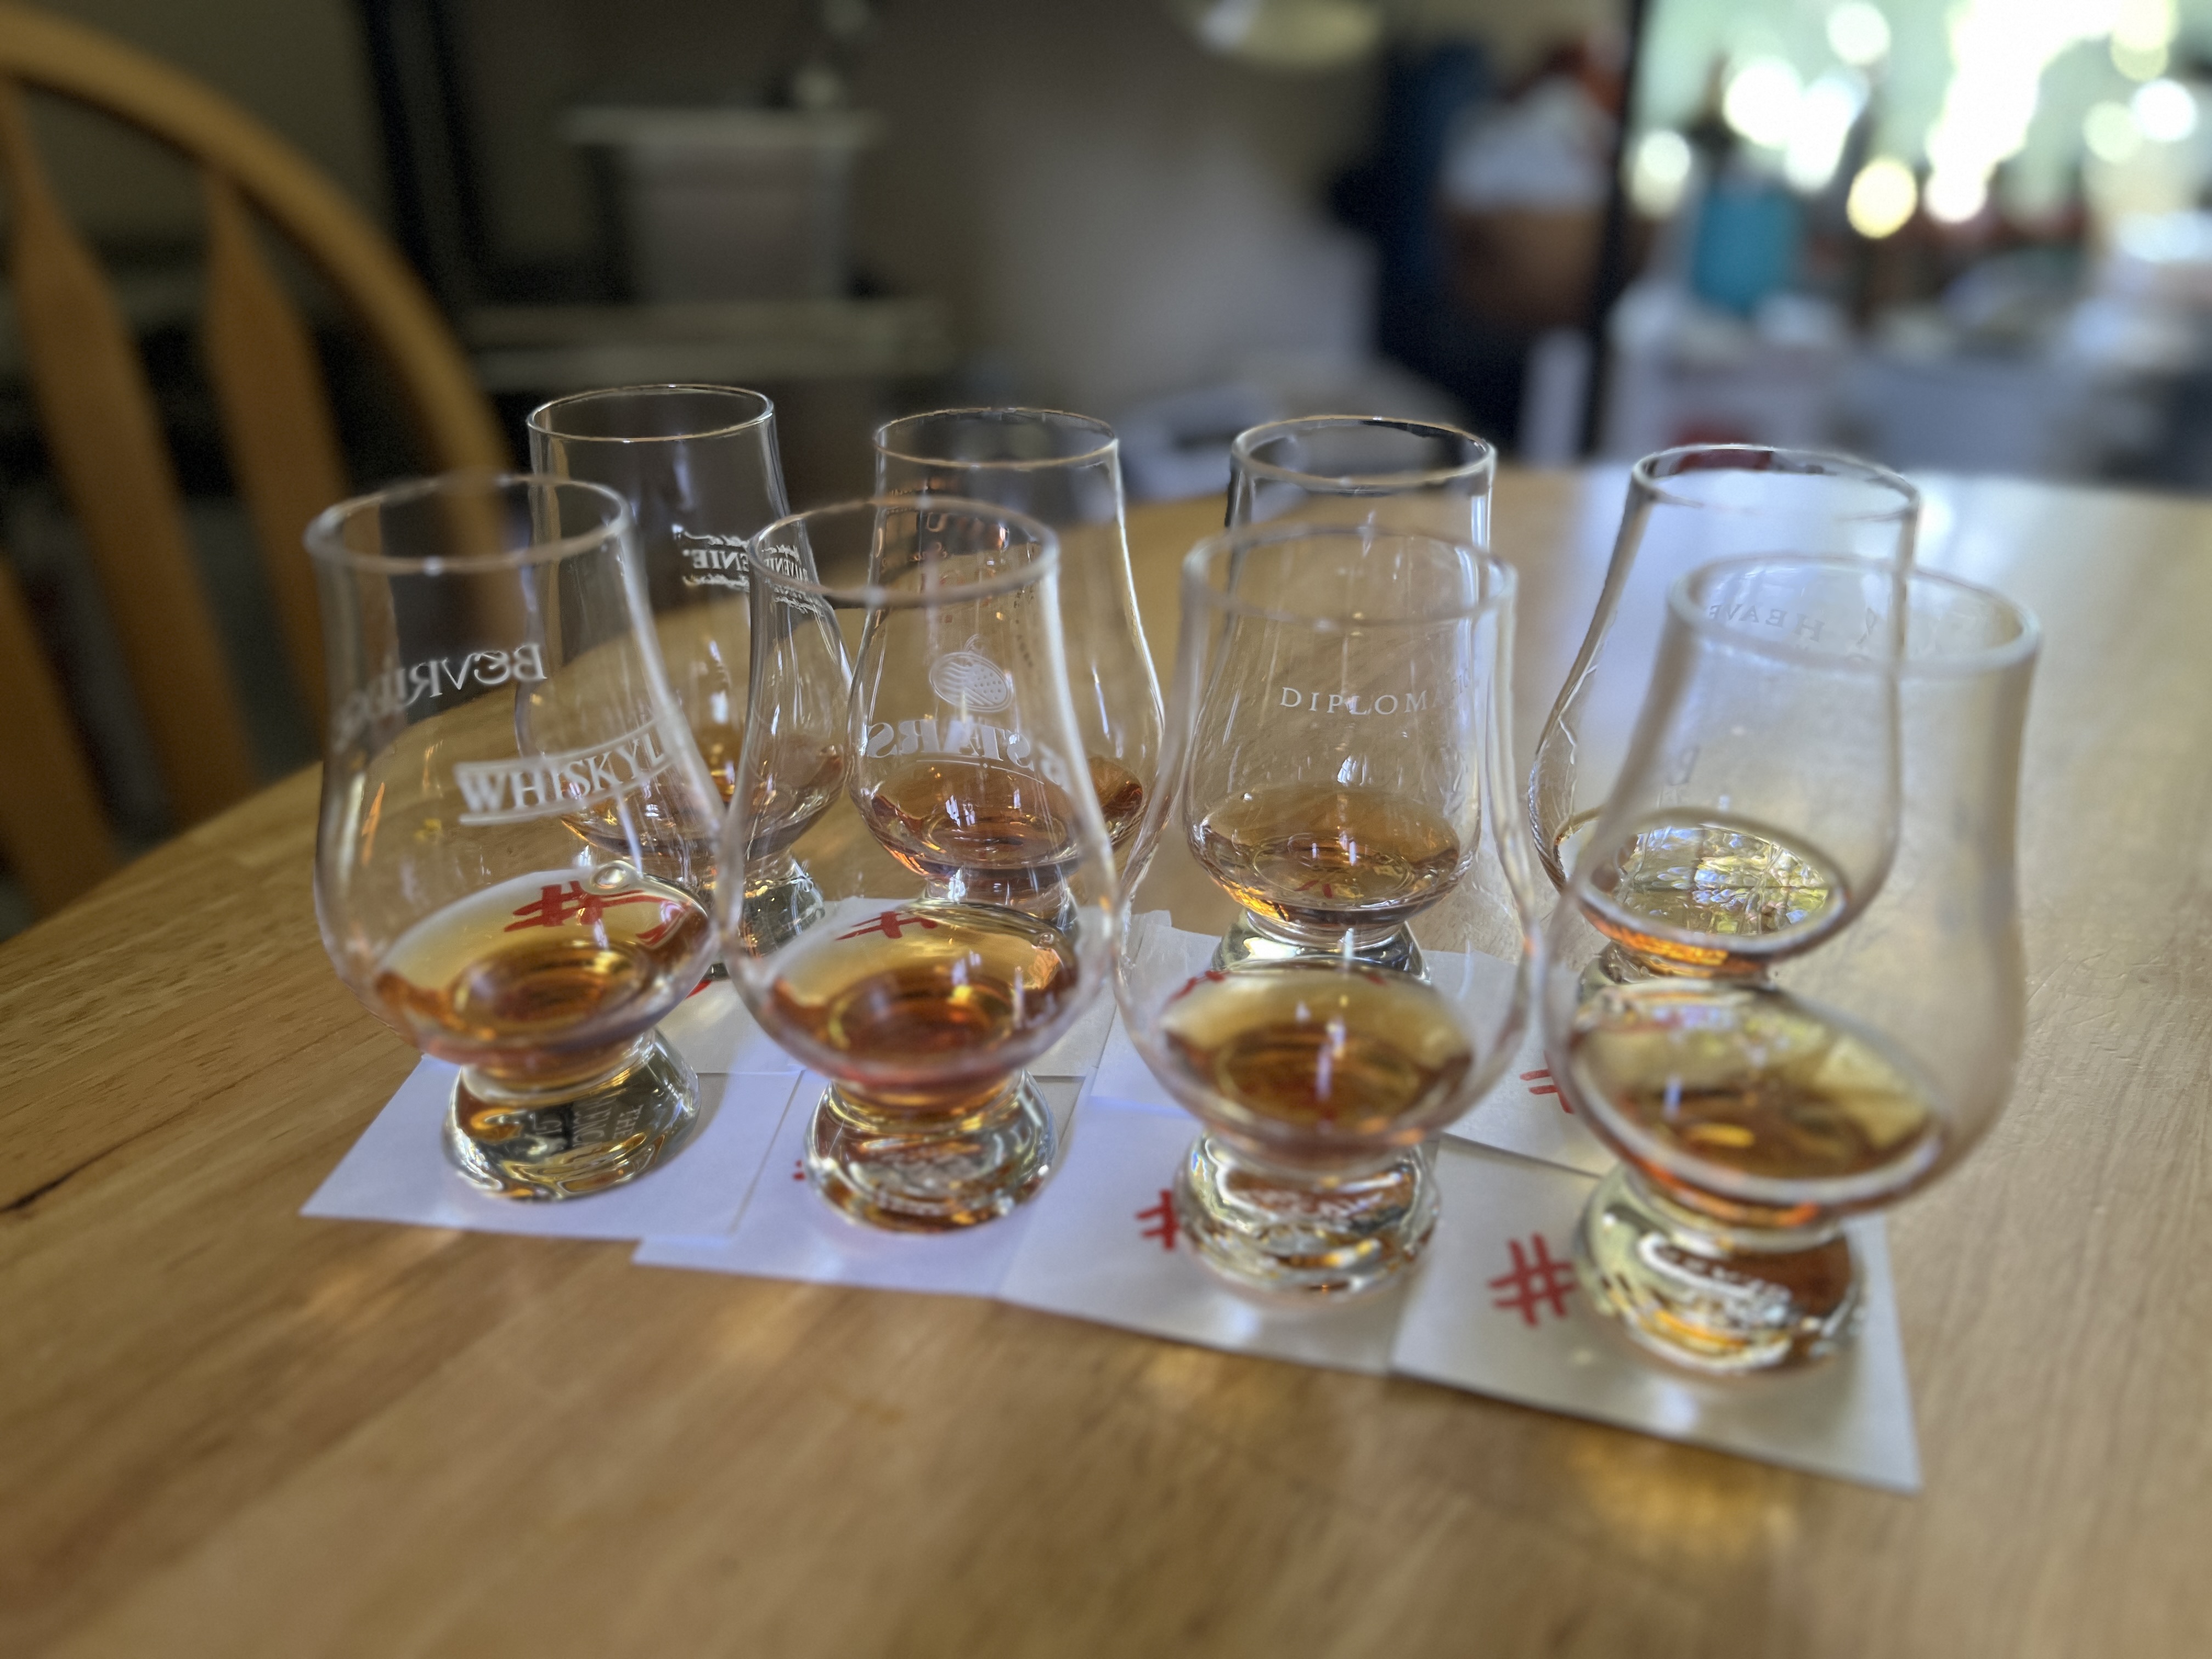 12-Year-Old Bourbons